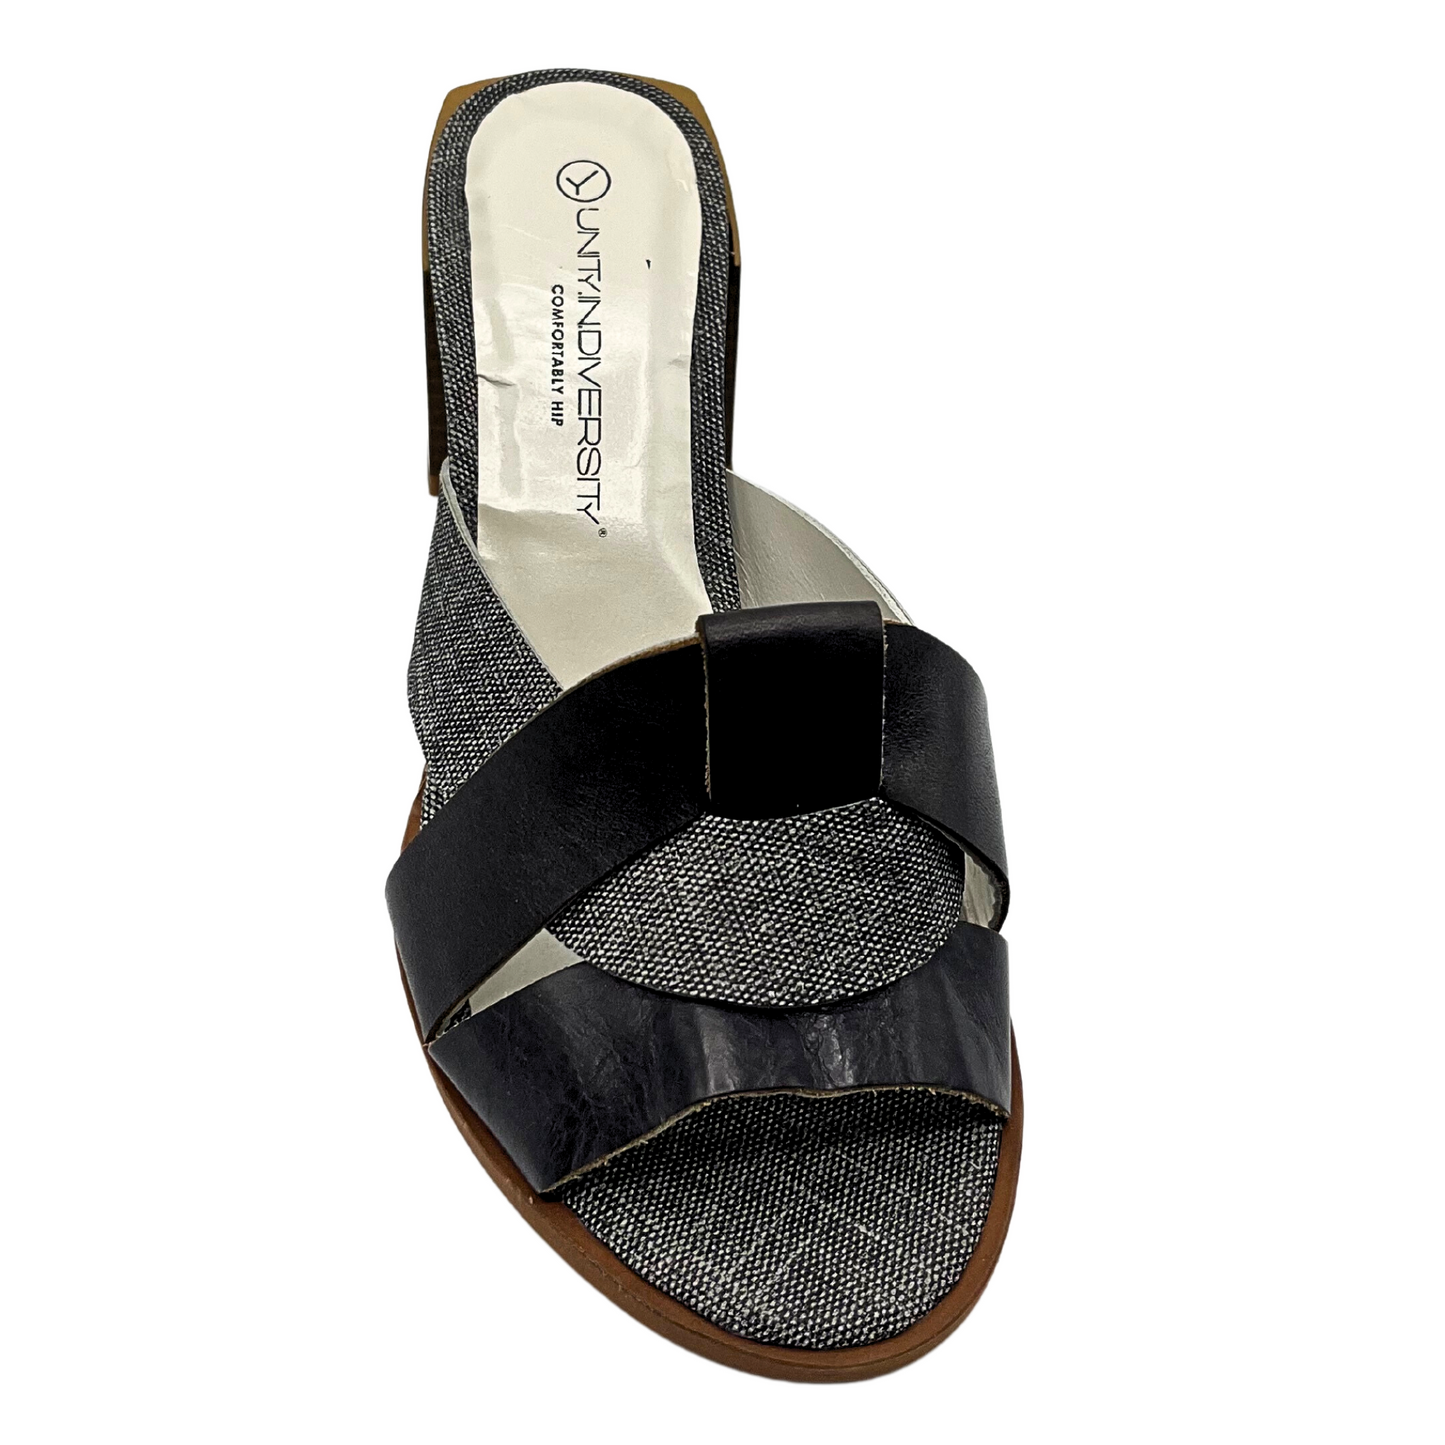 Top down view of a mule sandal with open toe.  Smooth black leather is combined with patterned black/white